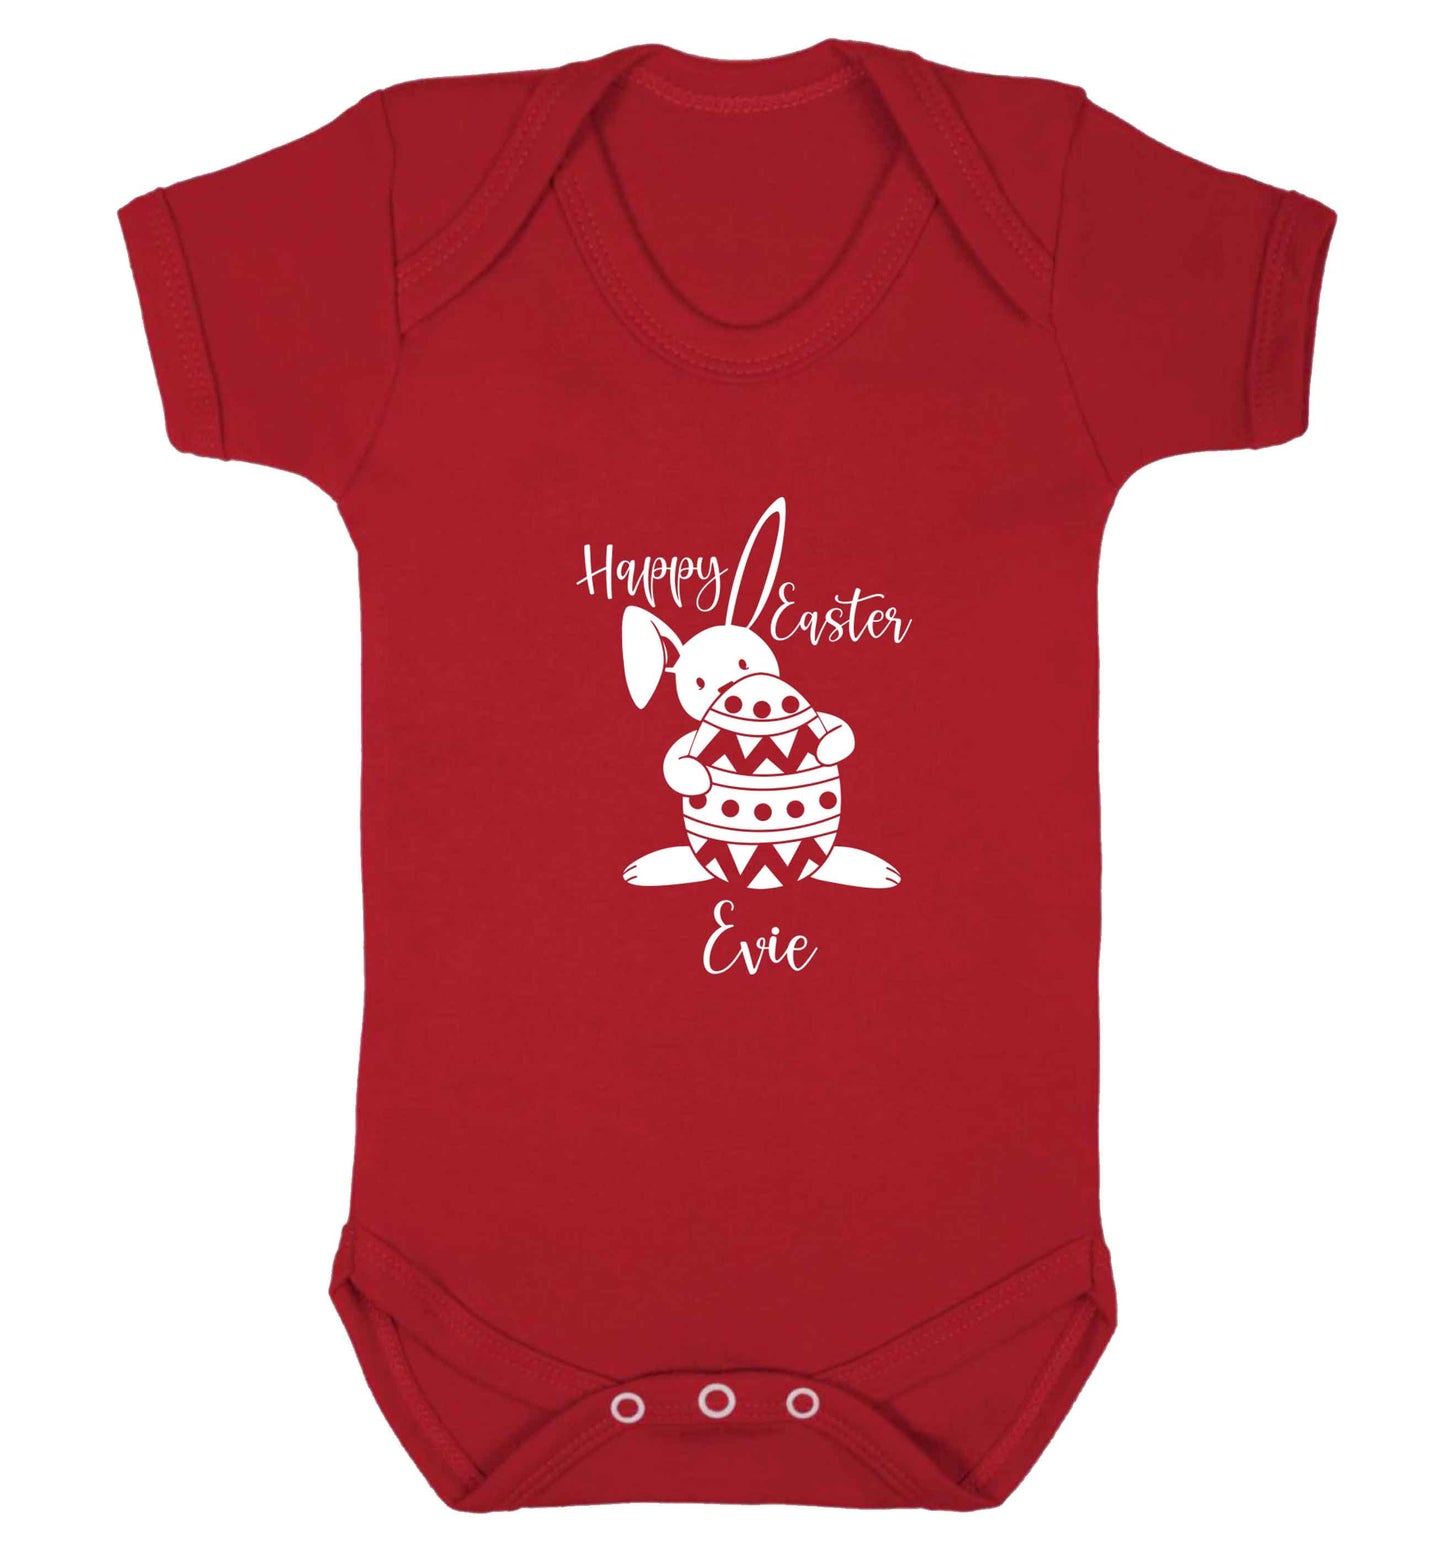 Happy Easter - personalised baby vest red 18-24 months